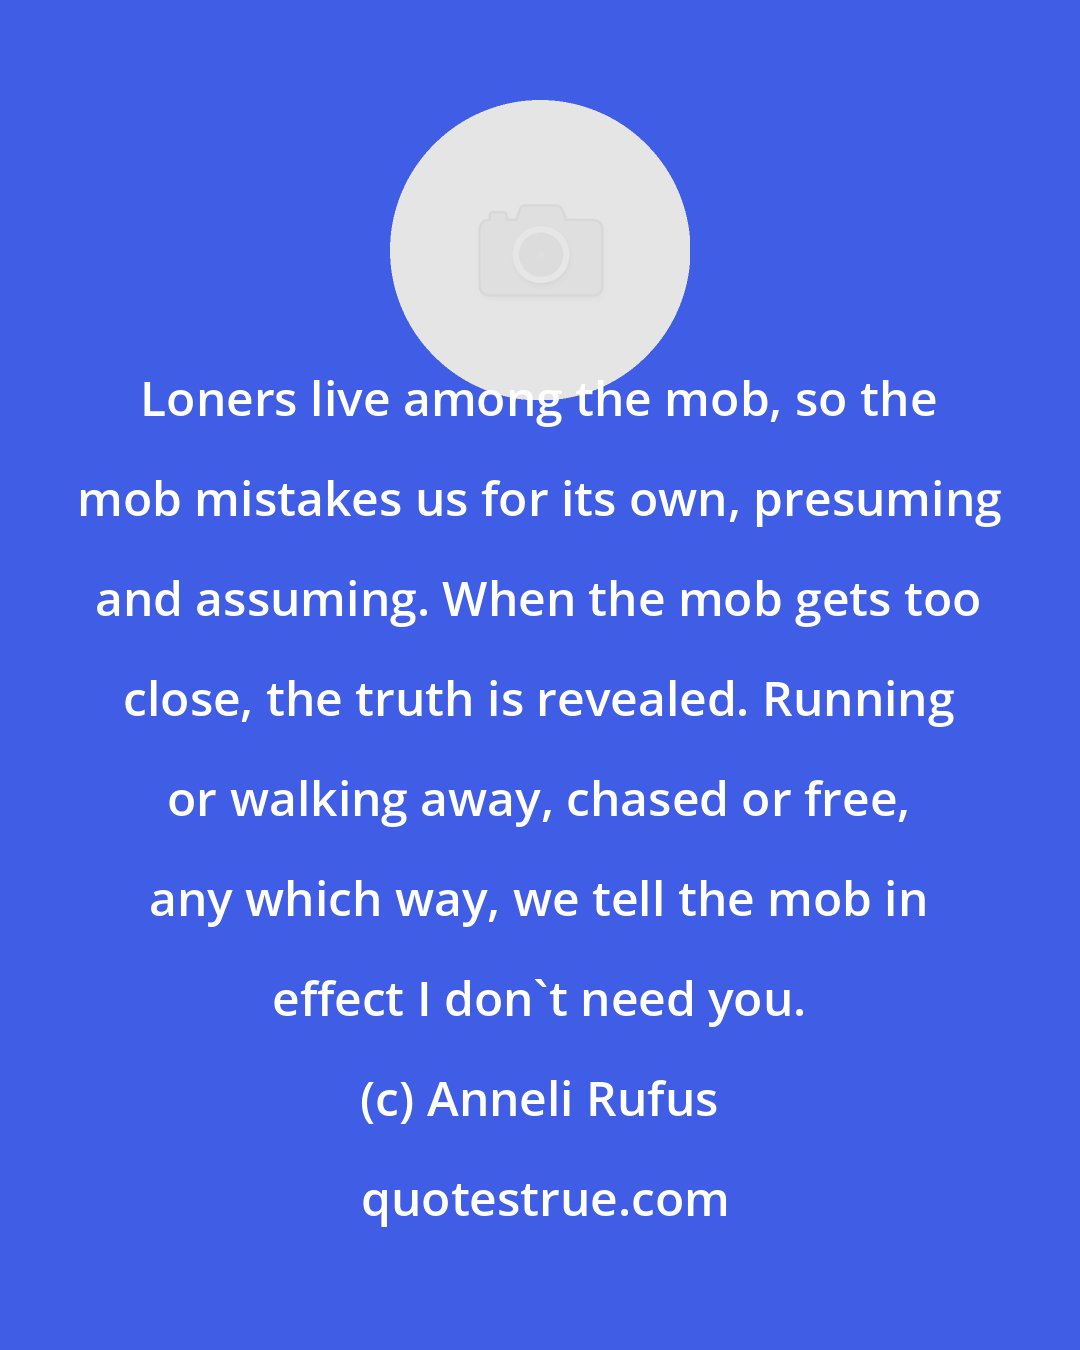 Anneli Rufus: Loners live among the mob, so the mob mistakes us for its own, presuming and assuming. When the mob gets too close, the truth is revealed. Running or walking away, chased or free, any which way, we tell the mob in effect I don't need you.